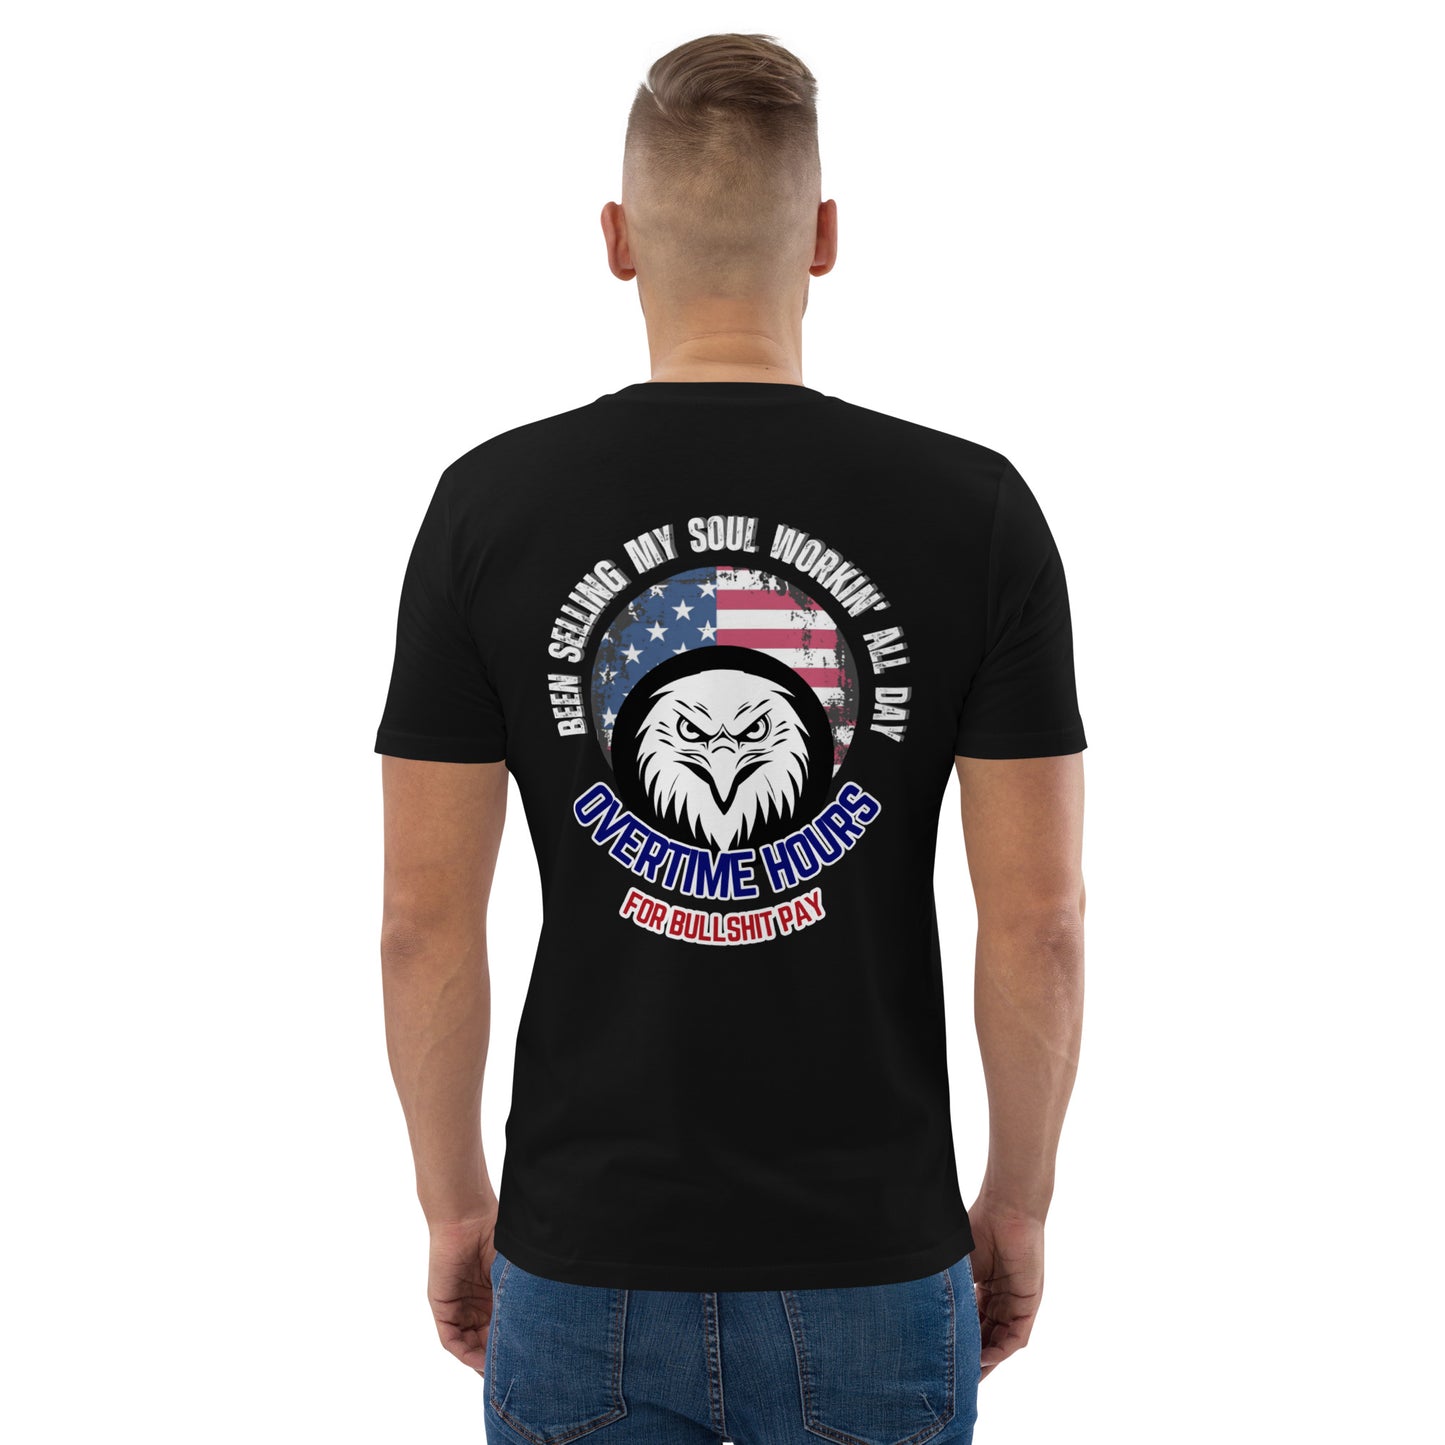 Been Selling My Soul working all day overtime hours for bullshit pay TShirt shirt johnnys goods mens black top usa